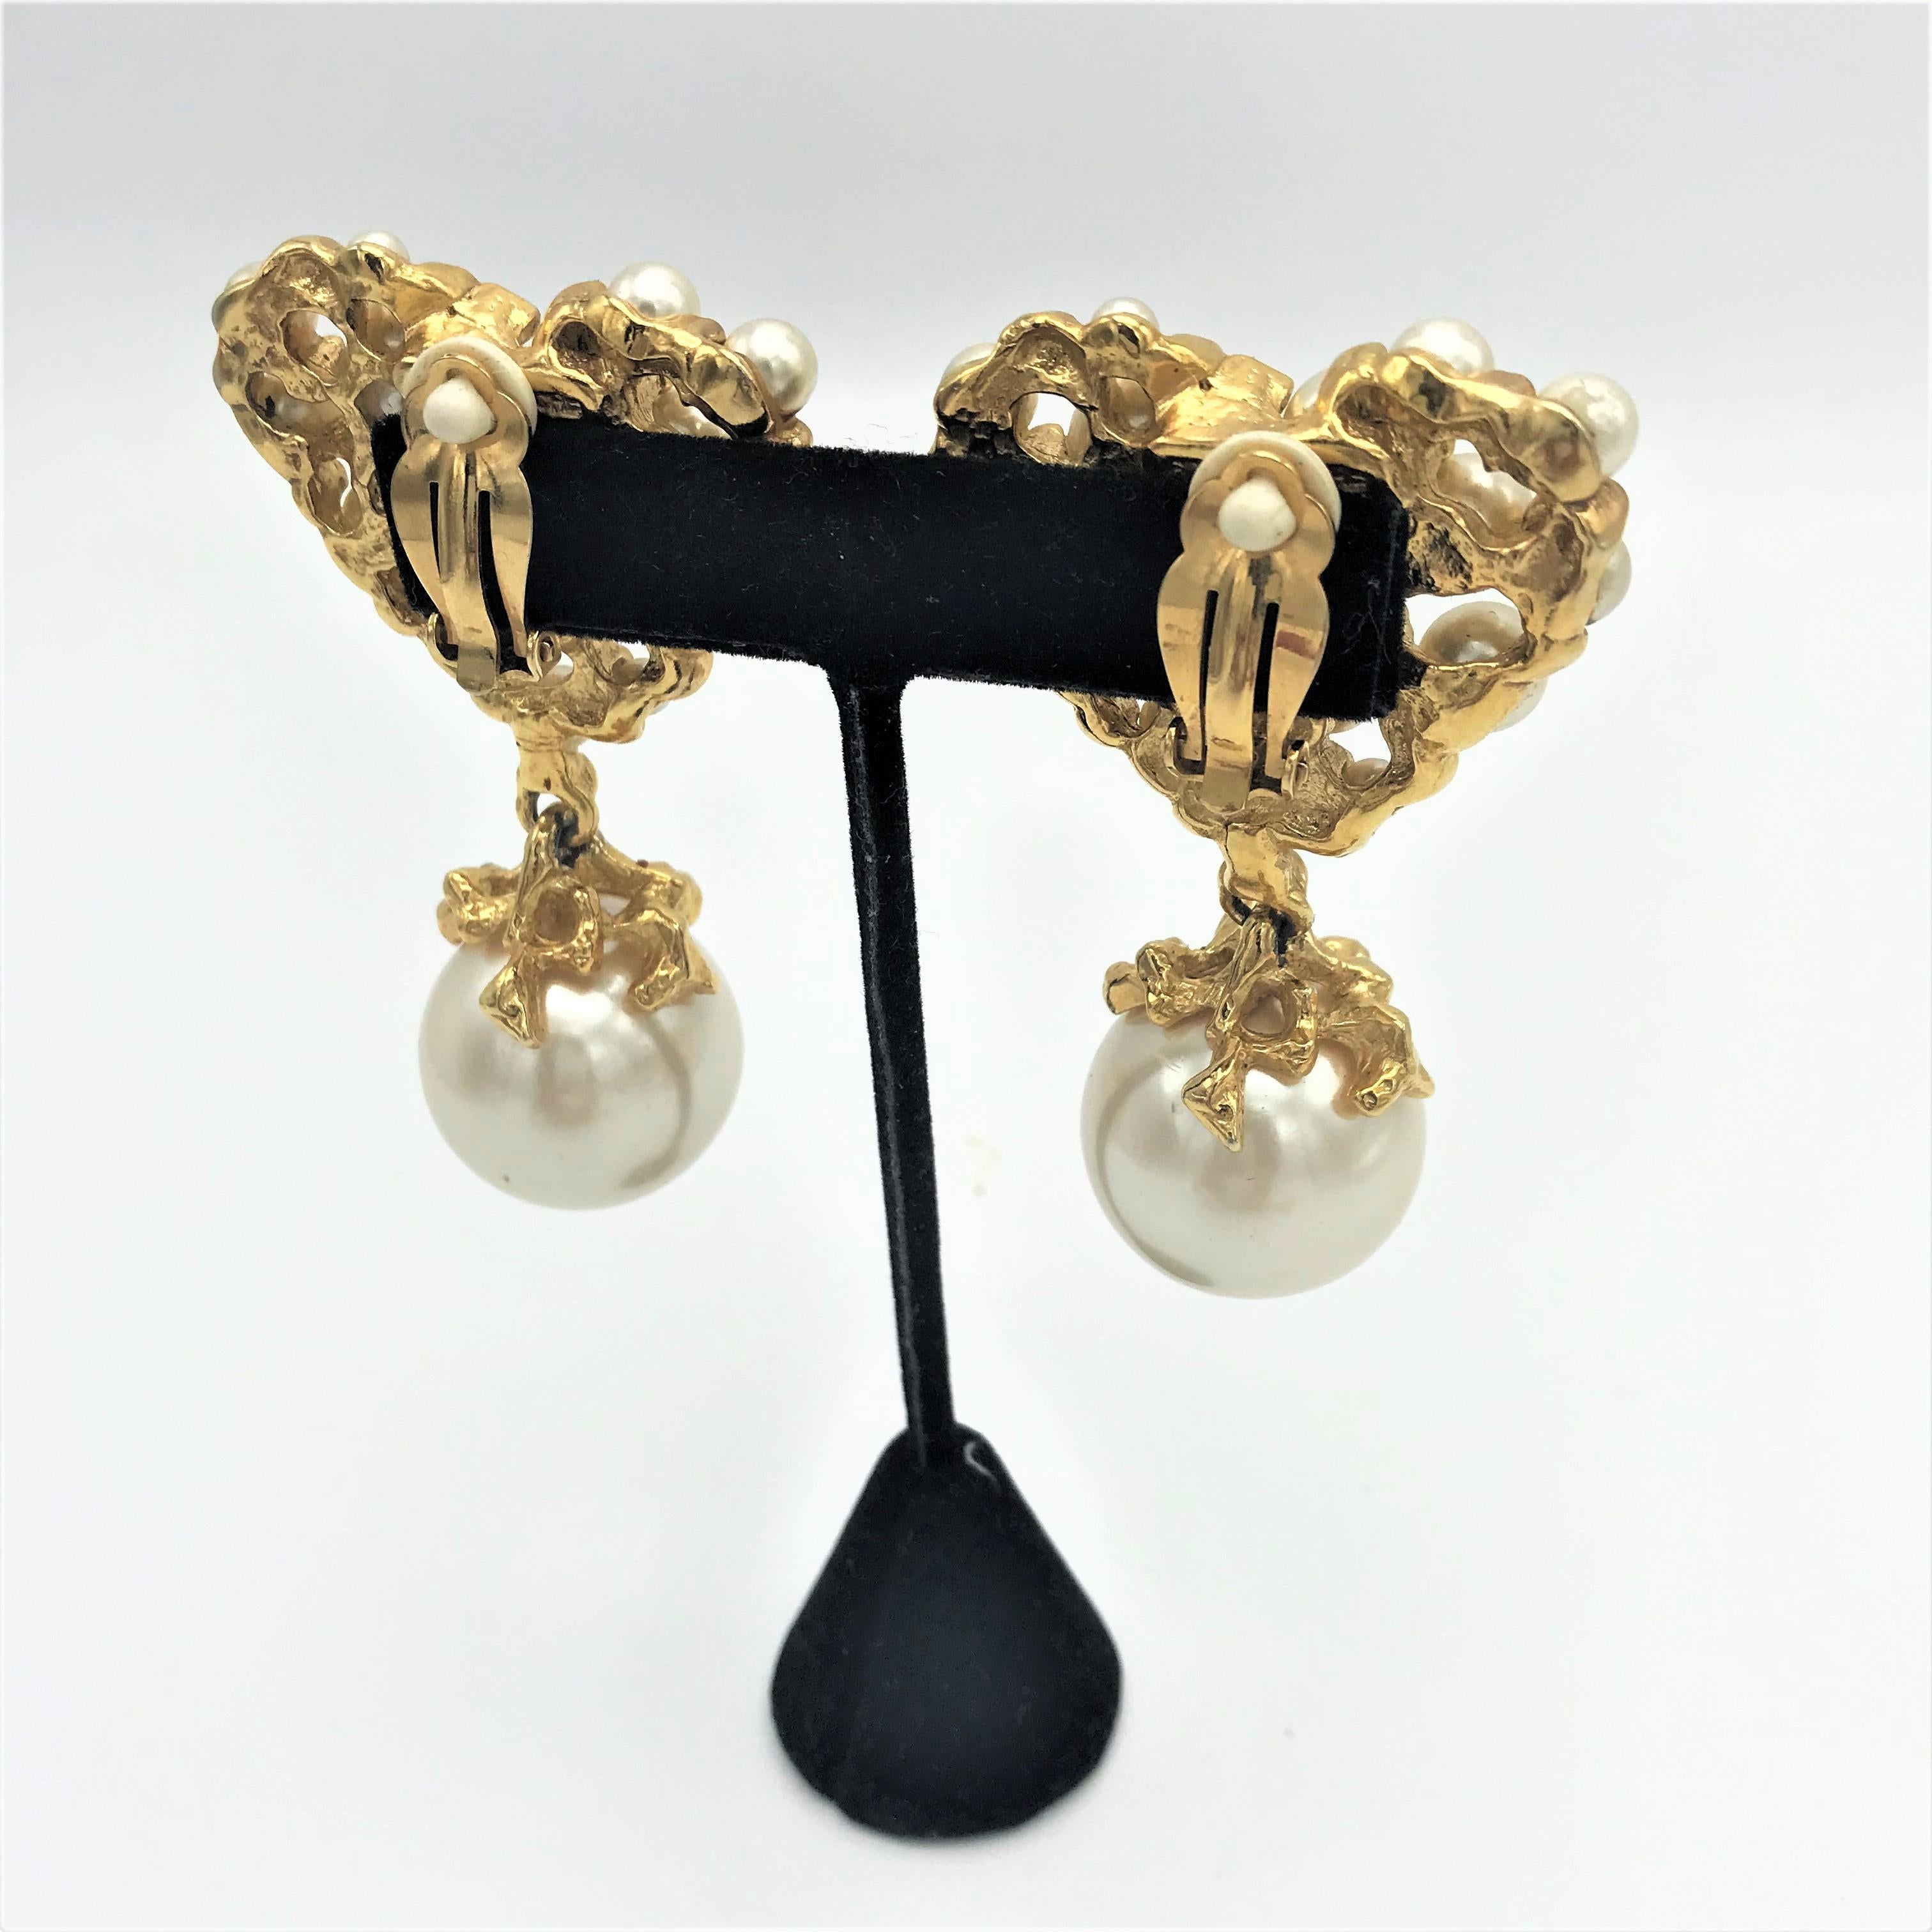 Heart clip on earring with many faux pearls, signed Guy Laroche Paris 1990s 1